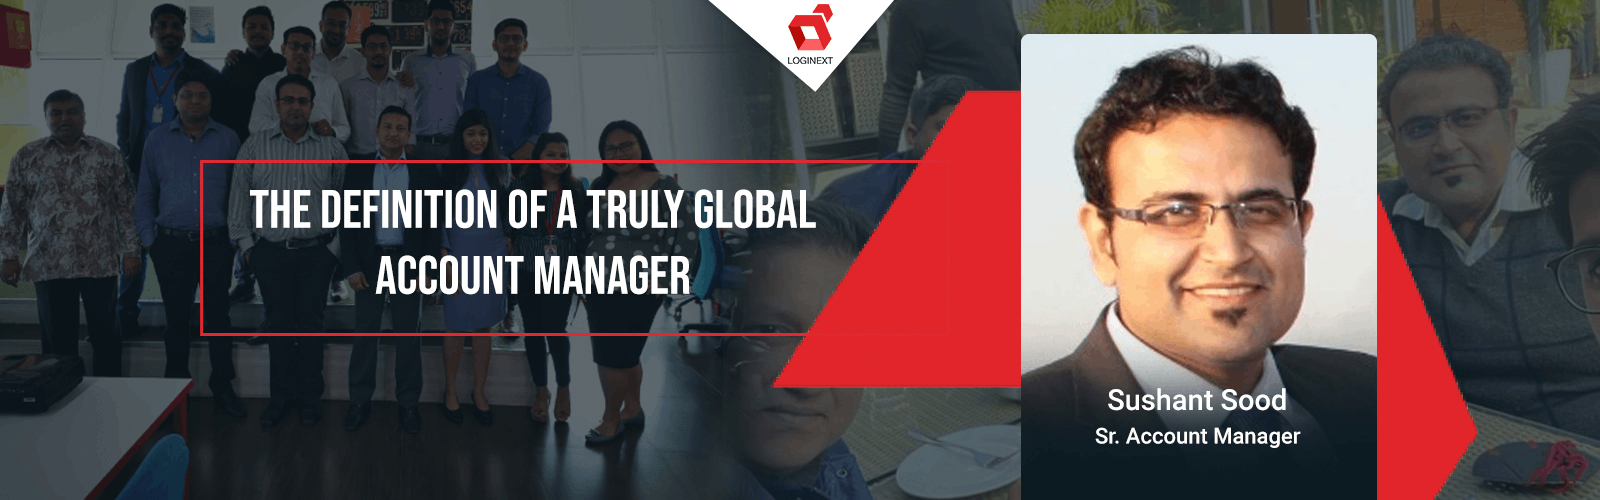 The definition of a truly global account manager, meet LogiNext’s Sushant Sood